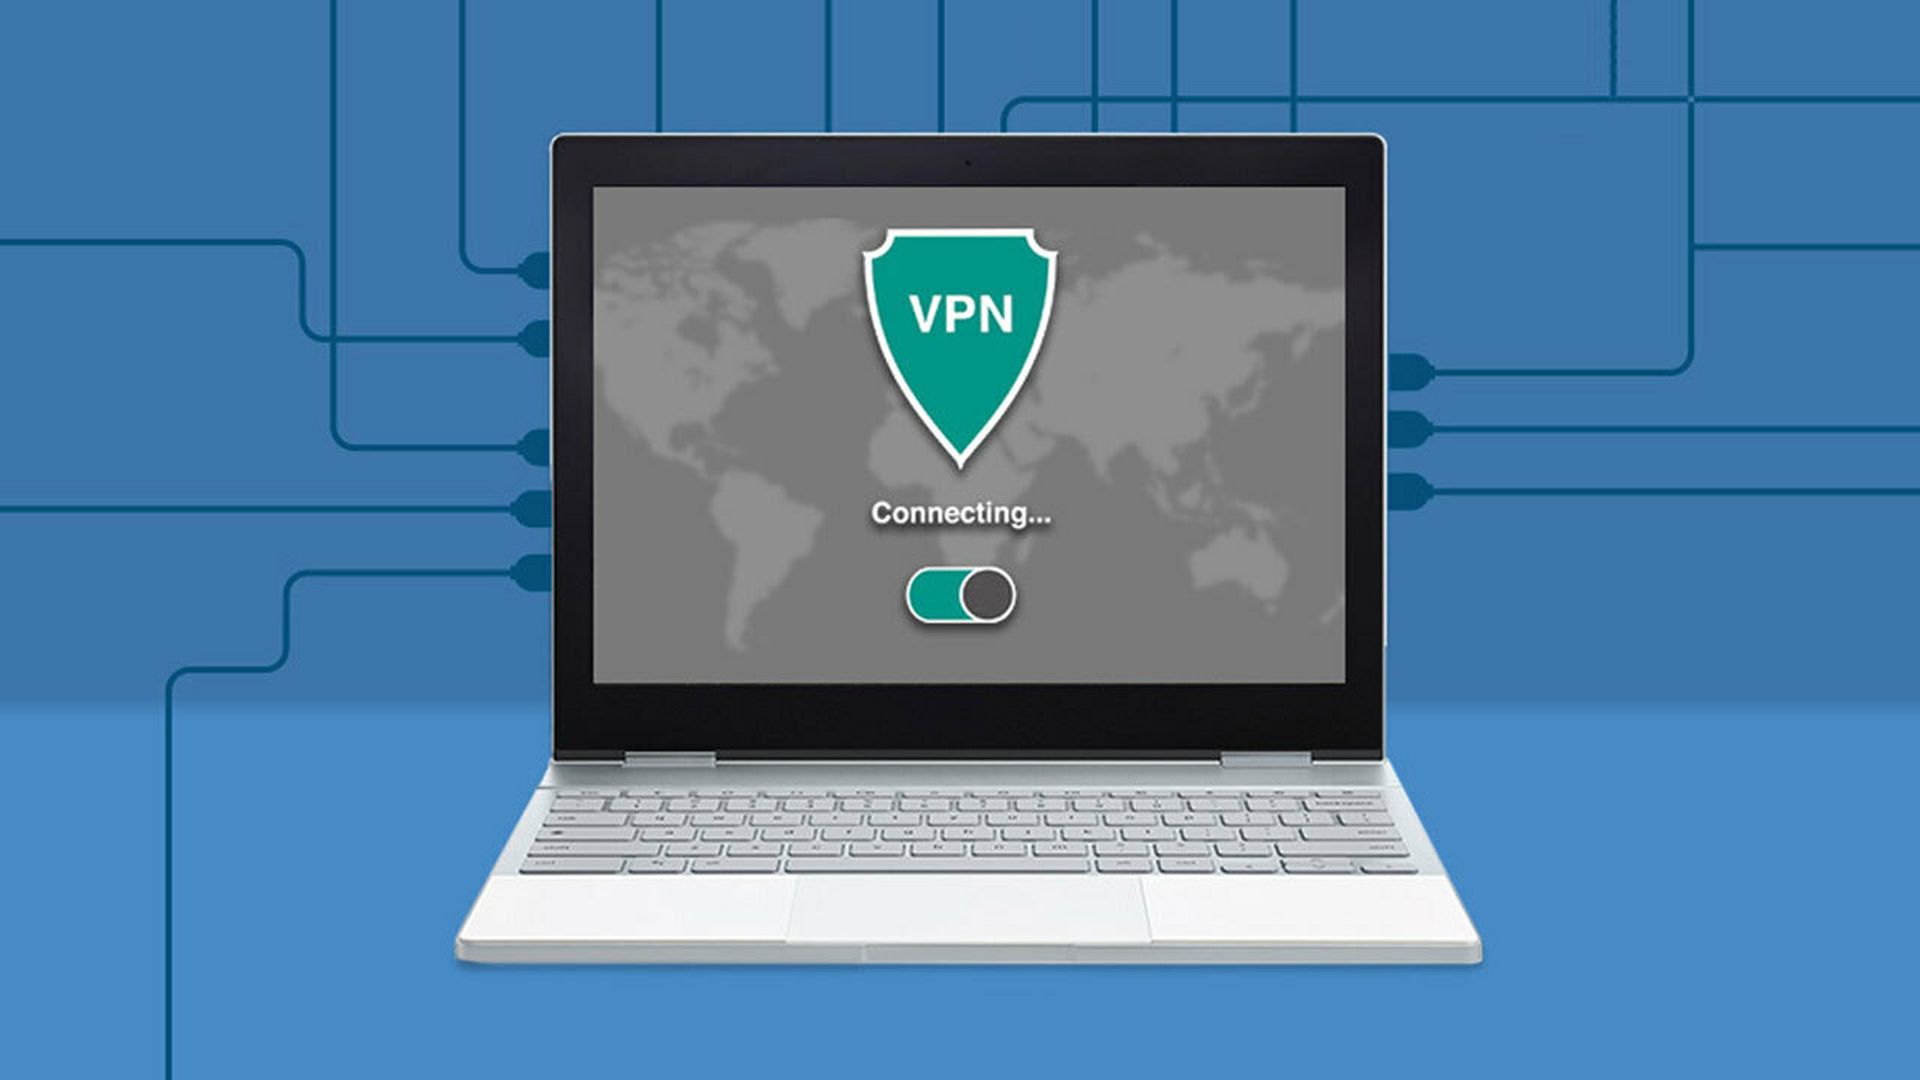 How to get VPN on Chromebook?